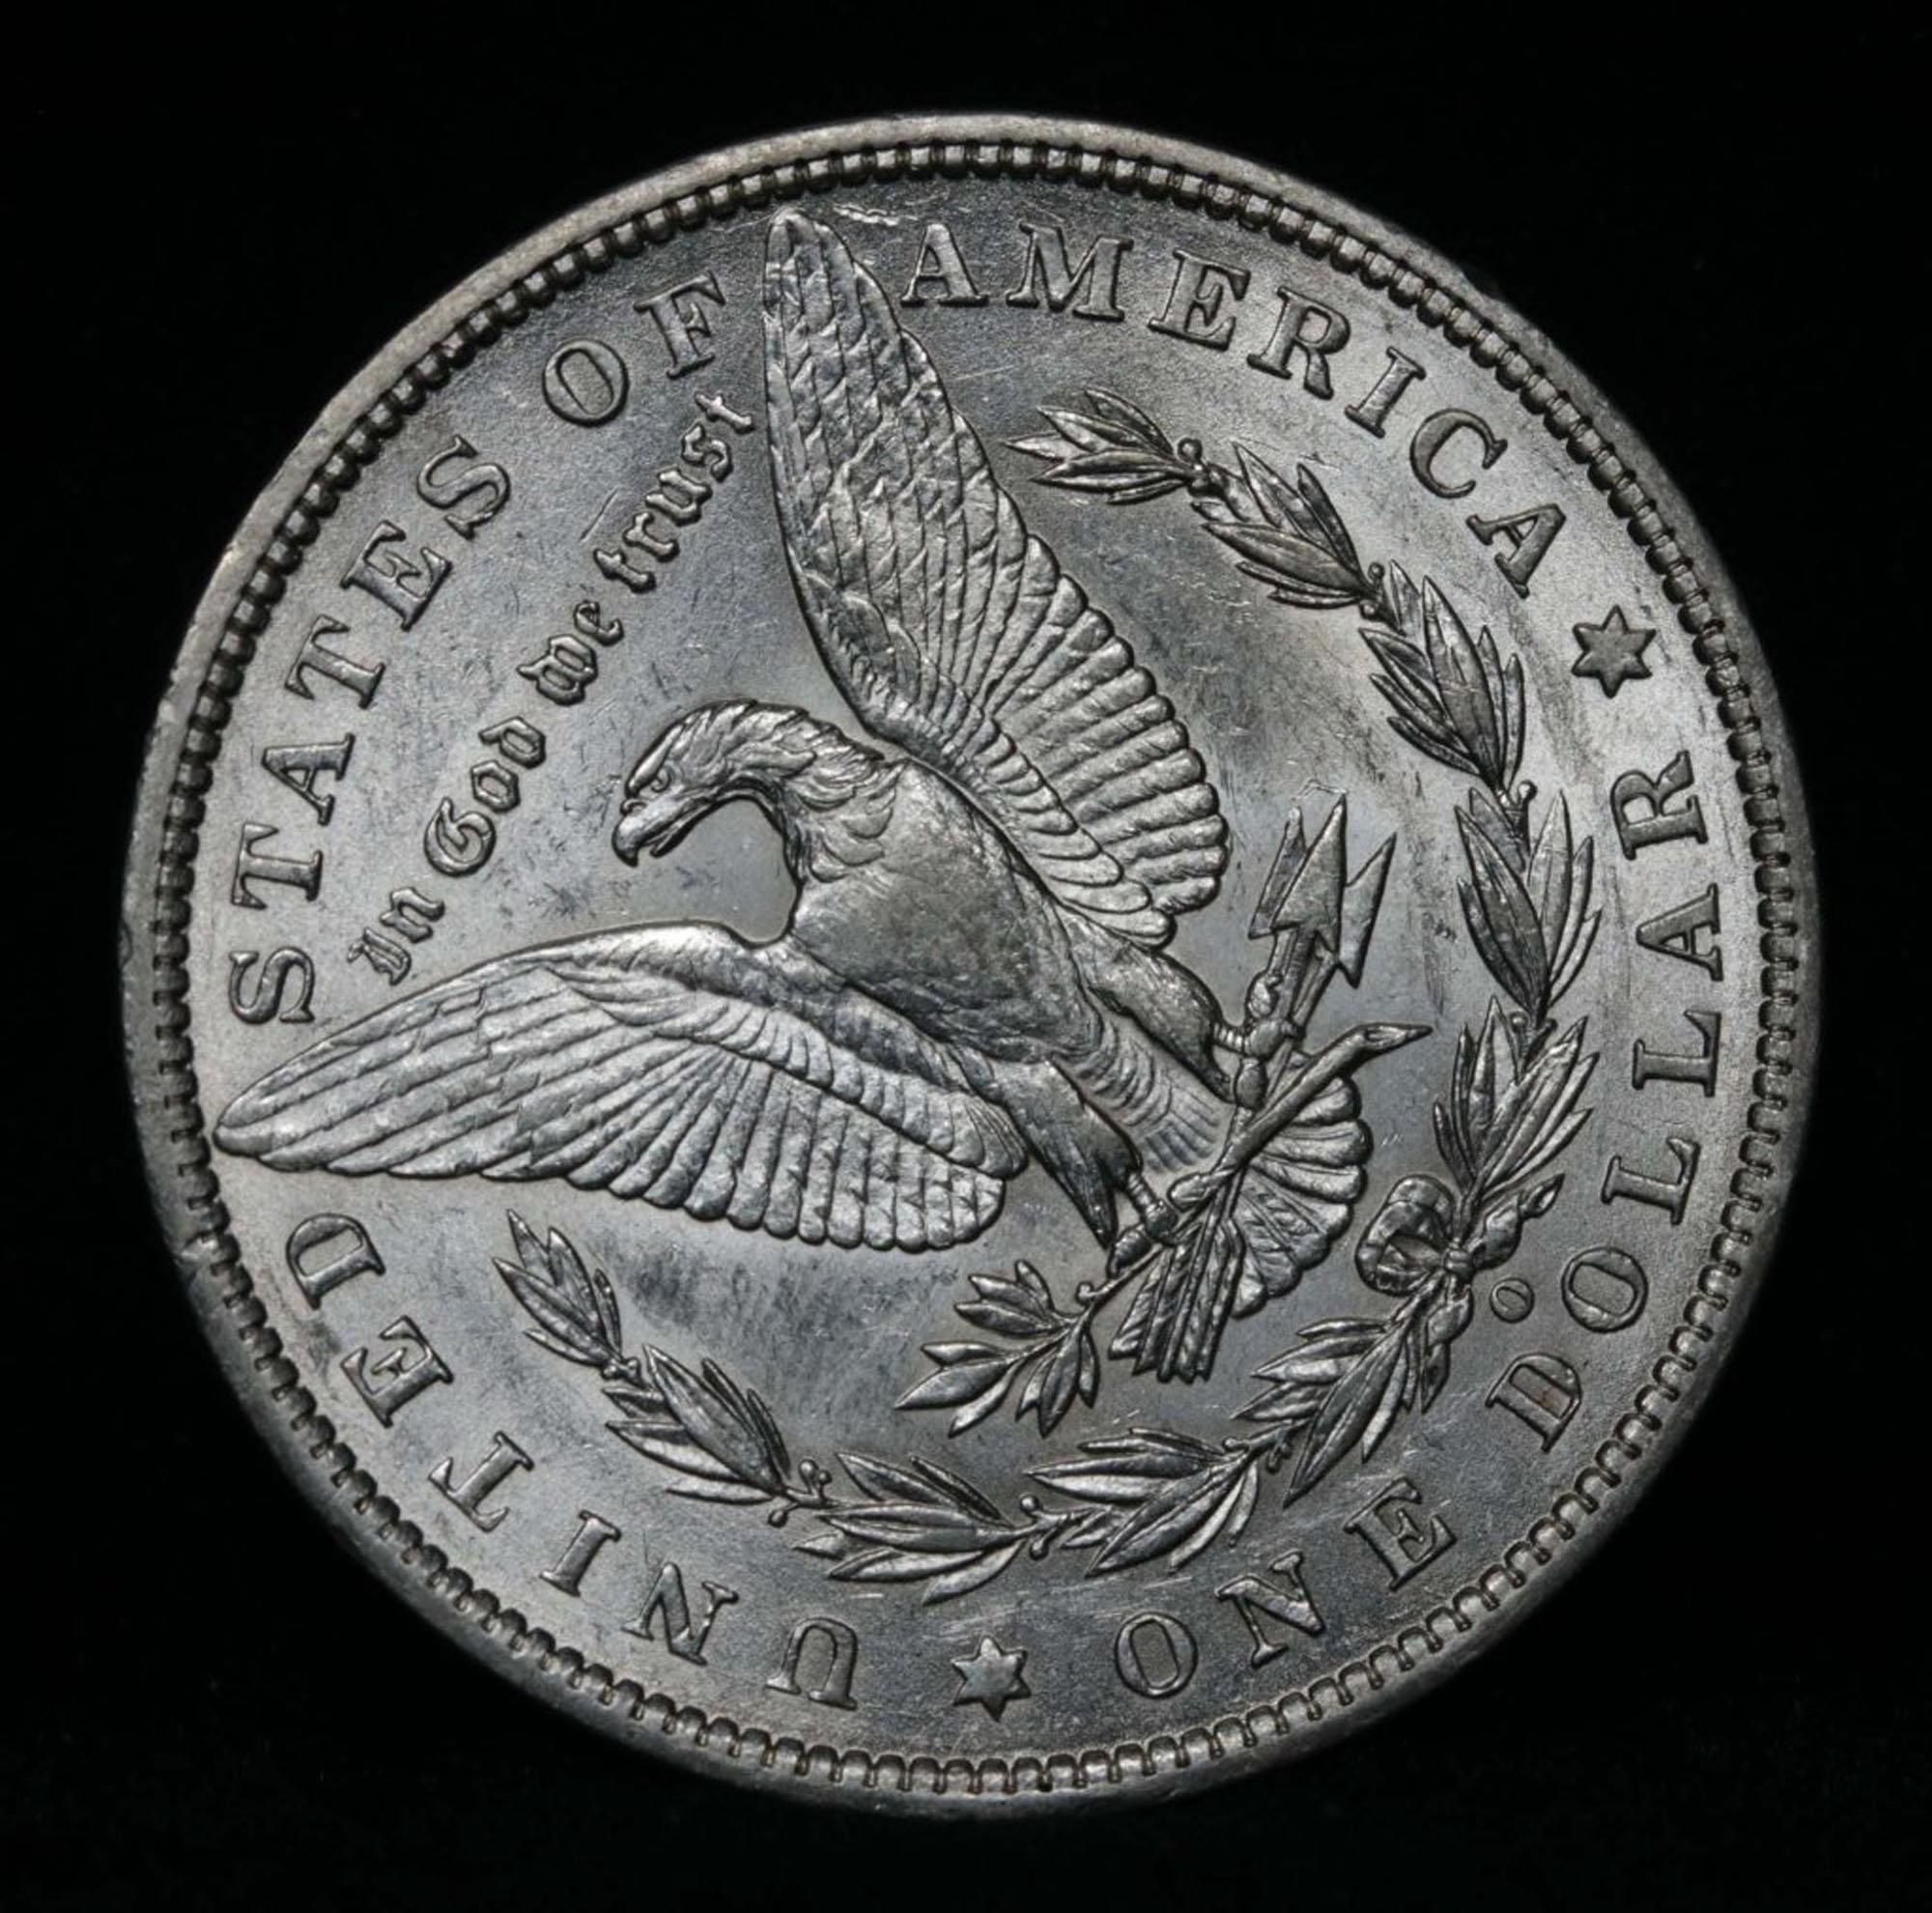 ***Auction Highlight** Ultra rare rotated die 1886-o Morgan Dollar $1 Graded Select Unc by USCG (fc)